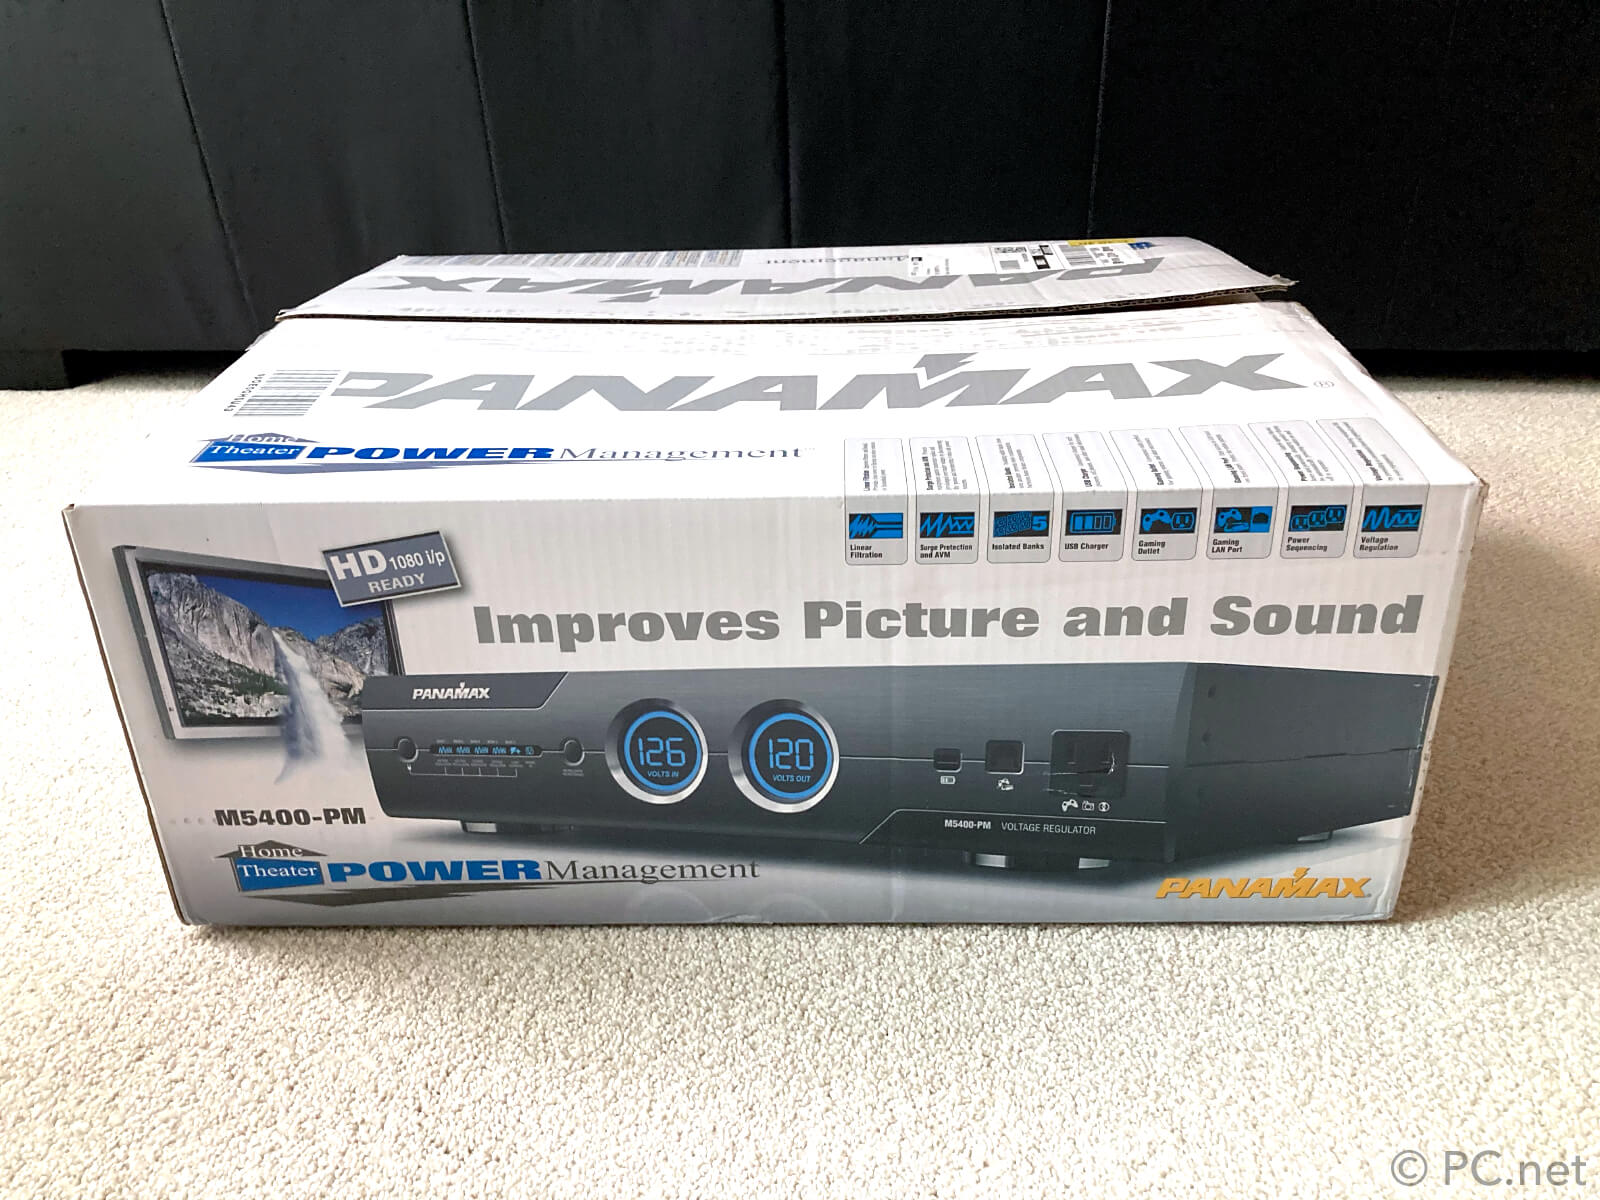 Panamax M5400-PM Box - Improves Picture and Sound